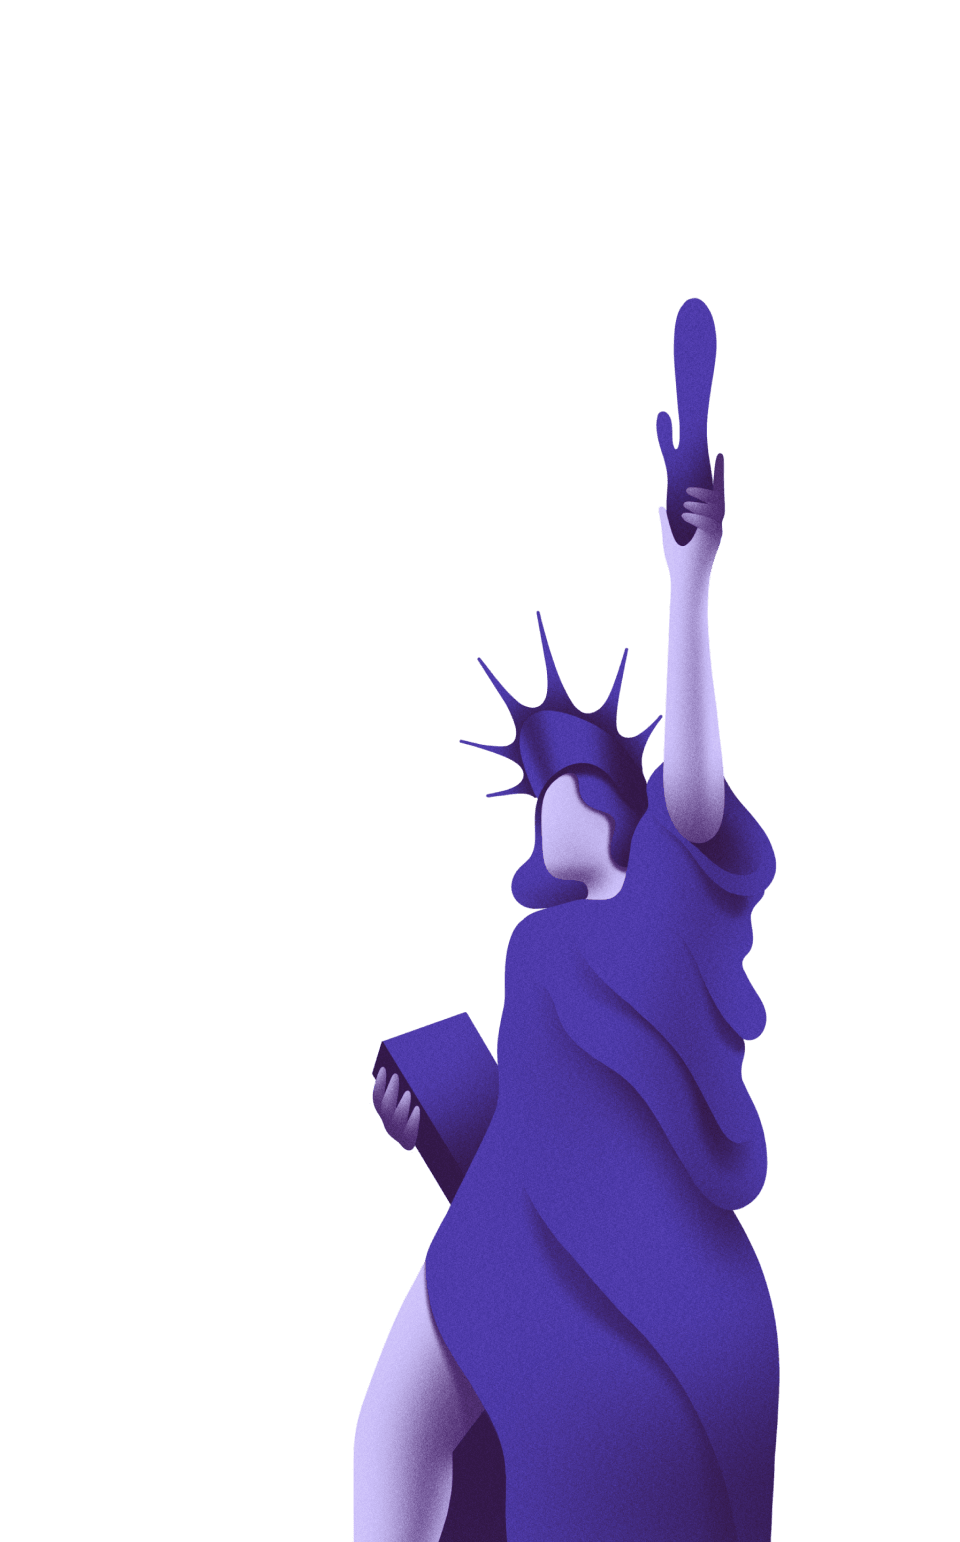 Illustration of a purple Statue of Liberty holding up a vibrator.